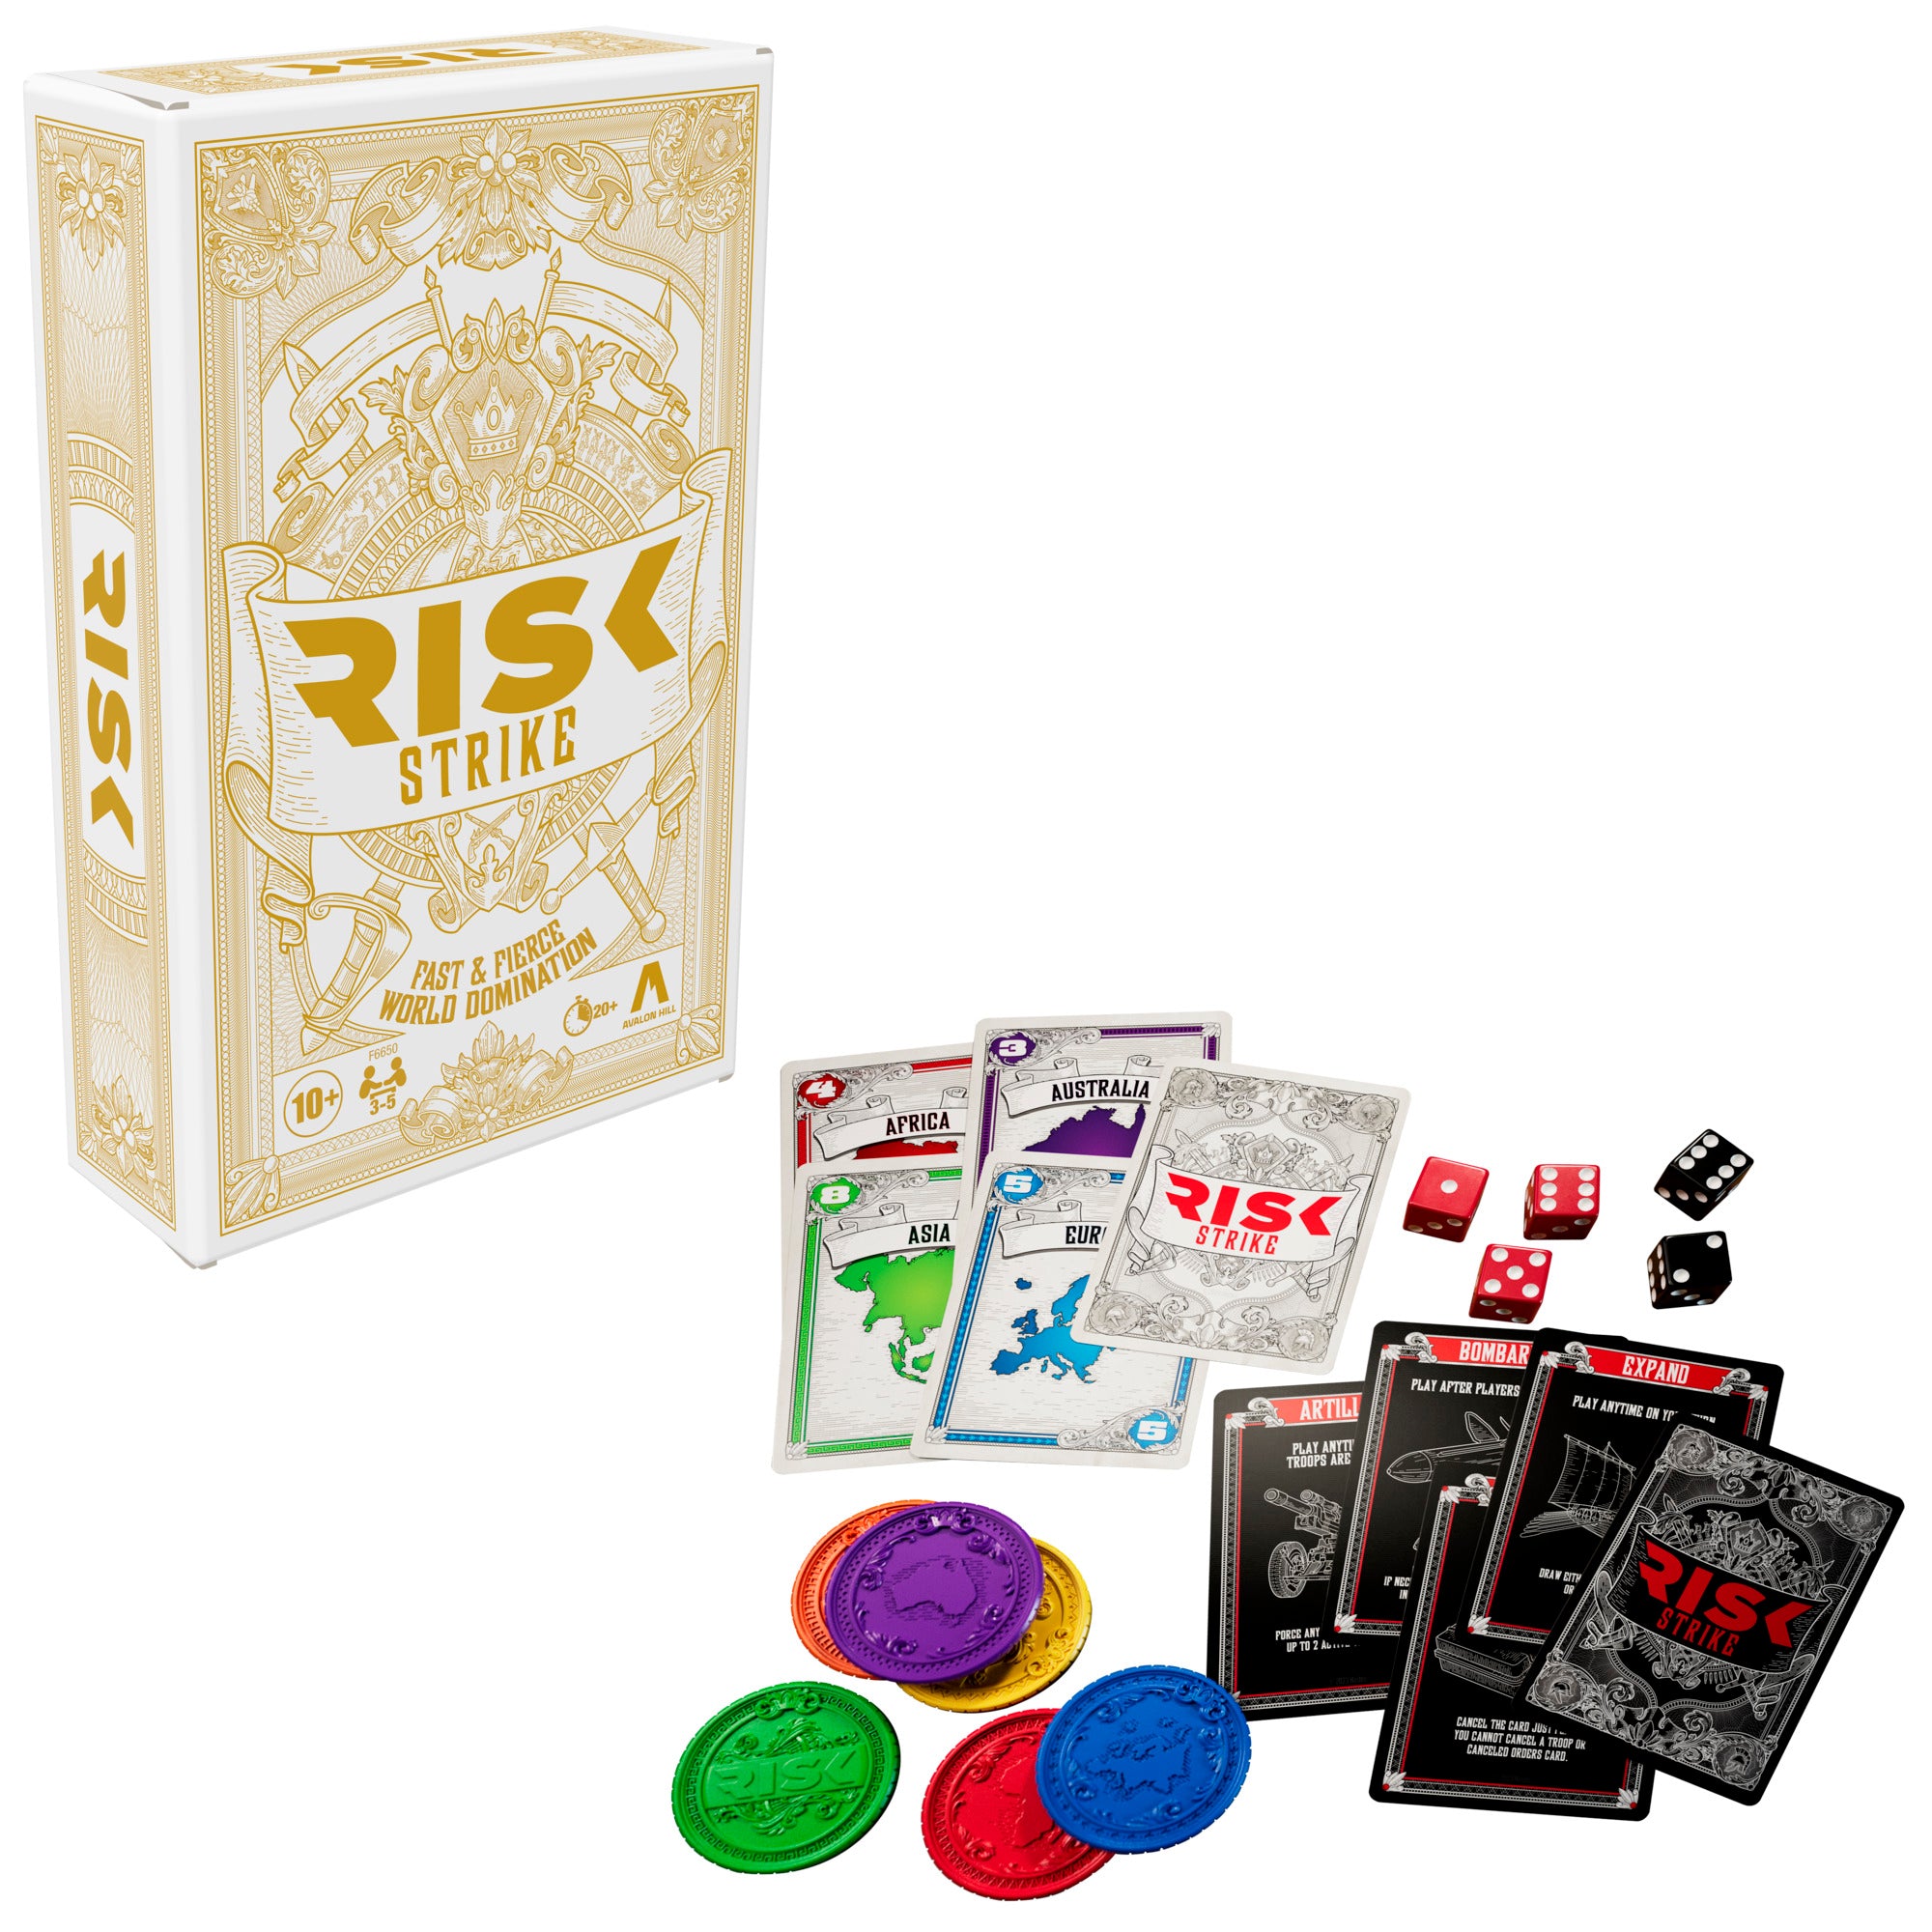 Clue Rivals Edition by Hasbro 2 Player Game